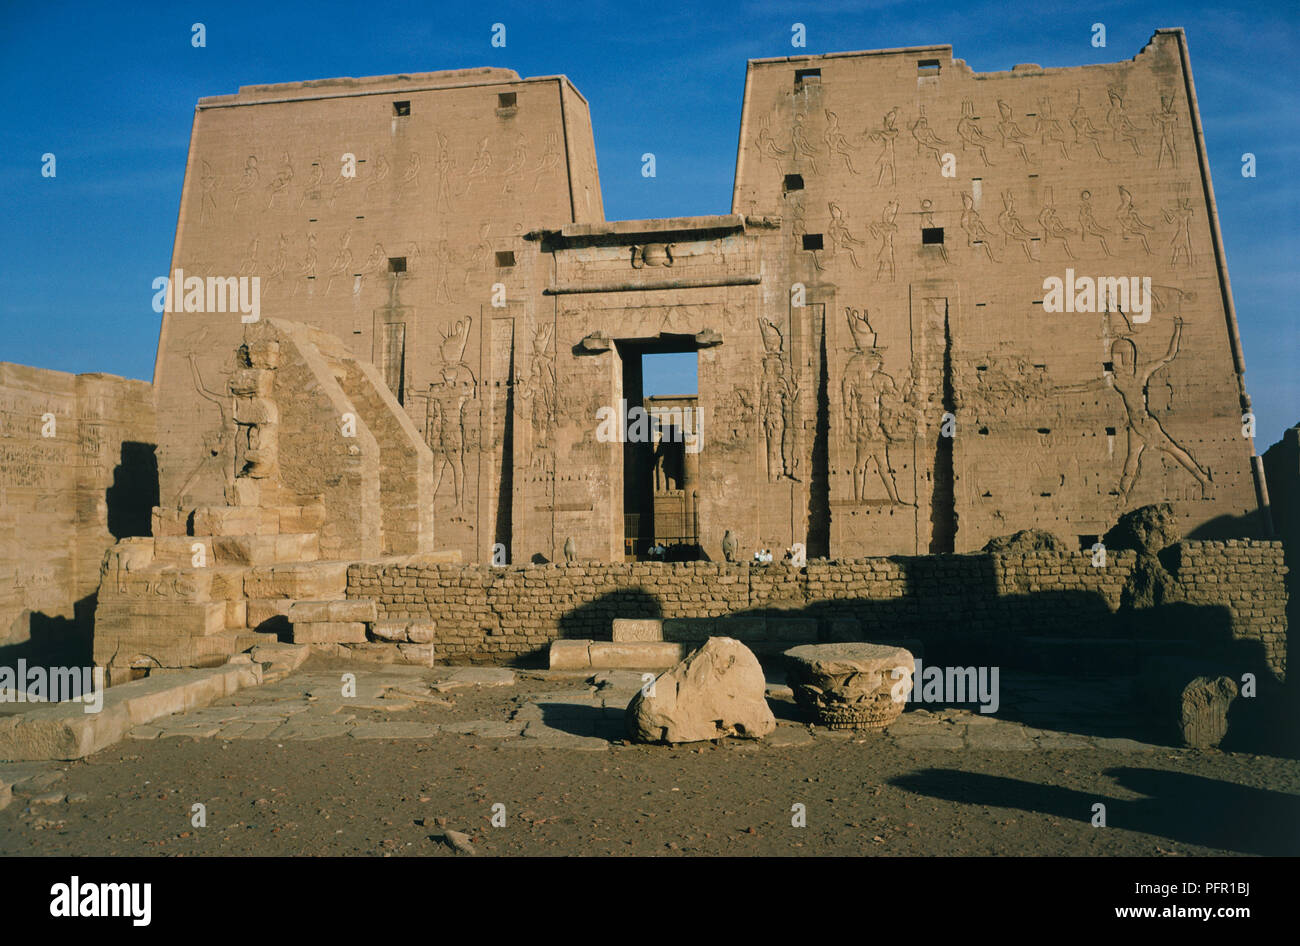 Egypt, Medinet Habu, Mortuary Temple of Ramesses III in the ancient Egyptian capital of Thebes Stock Photo